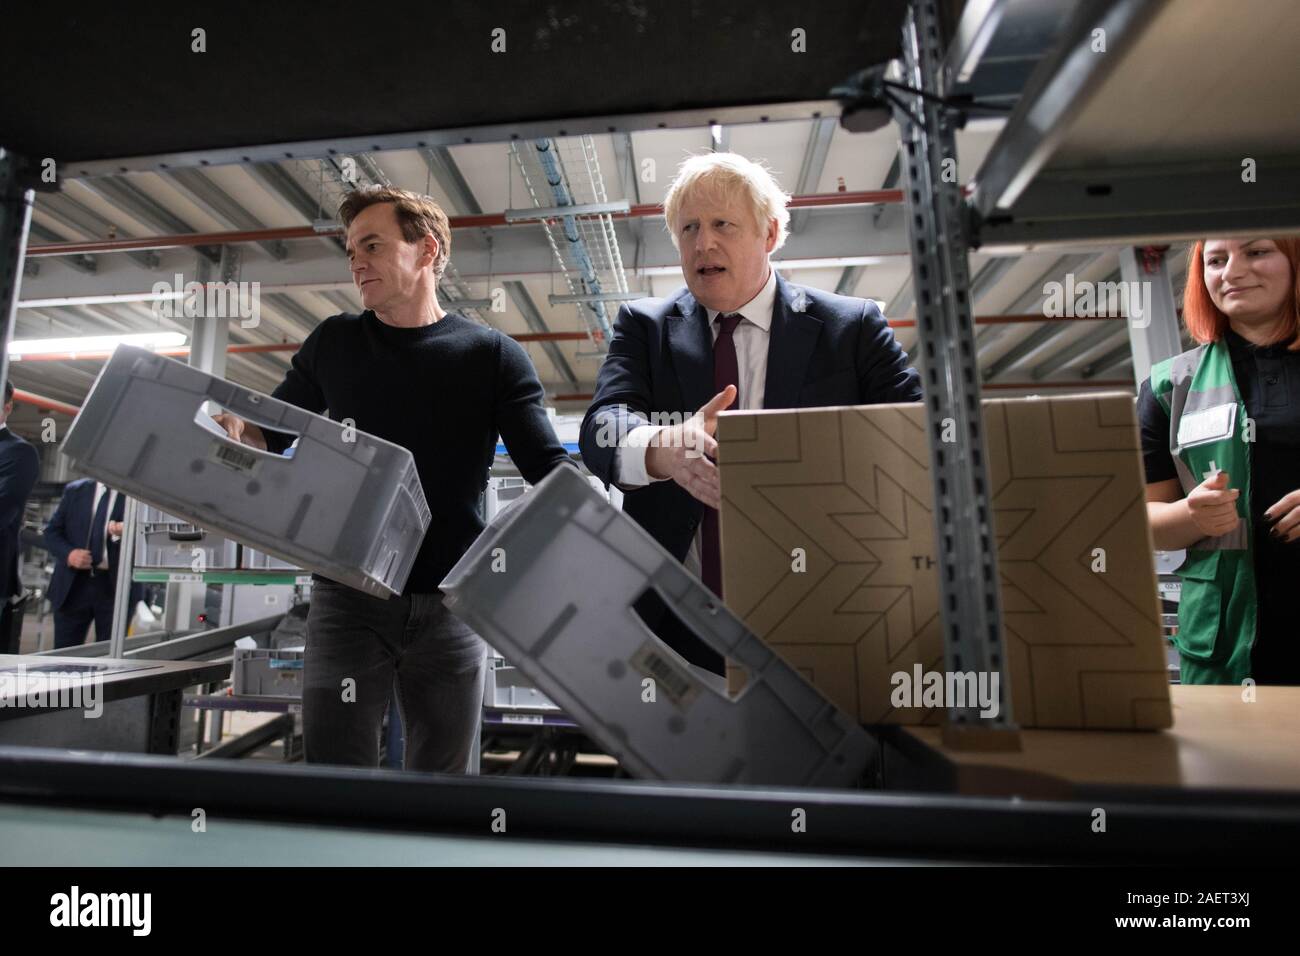 Prime Minister Boris Johnson during a visit to The Hut Group in Burtonwood, Warrington, while on the General Election campaign trail. Stock Photo